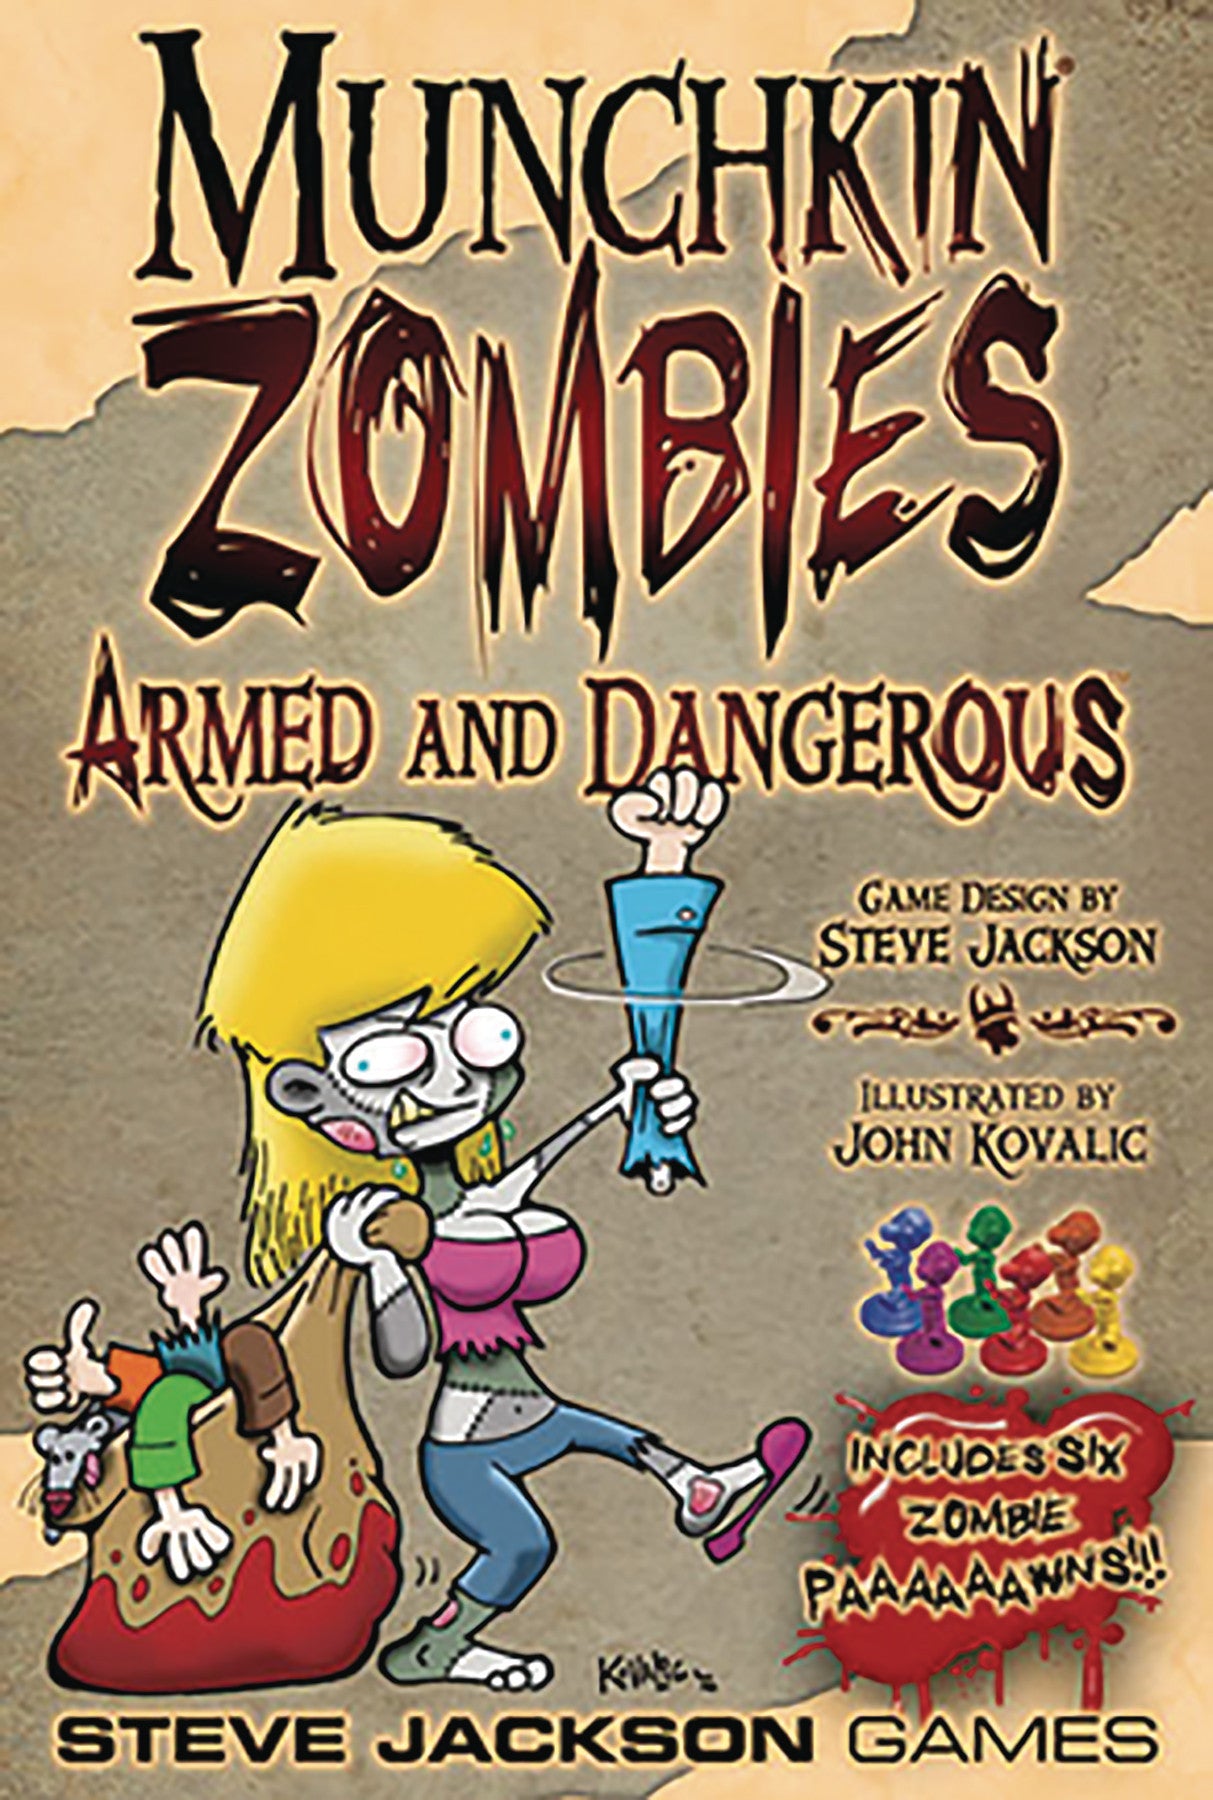 MUNCHKIN ZOMBIES ARMED AND DANGEROUS EXP